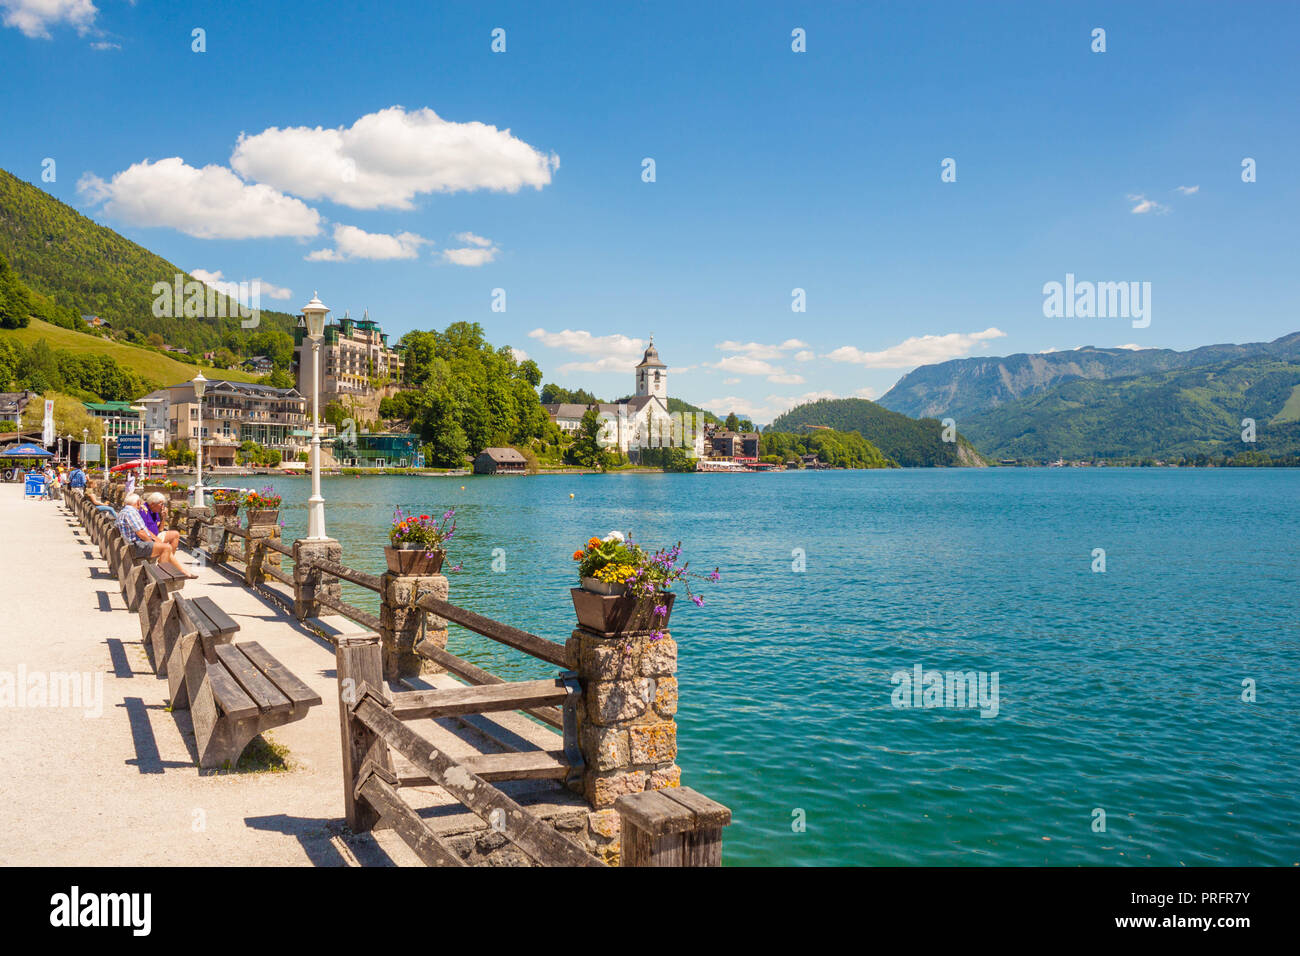 St. Wolfgang, Austria - May 27, 2017: Waterfront promenade on alpine lake Wolfgangsee with a row of wooden benches. View of St.Wolfgang church  and mo Stock Photo